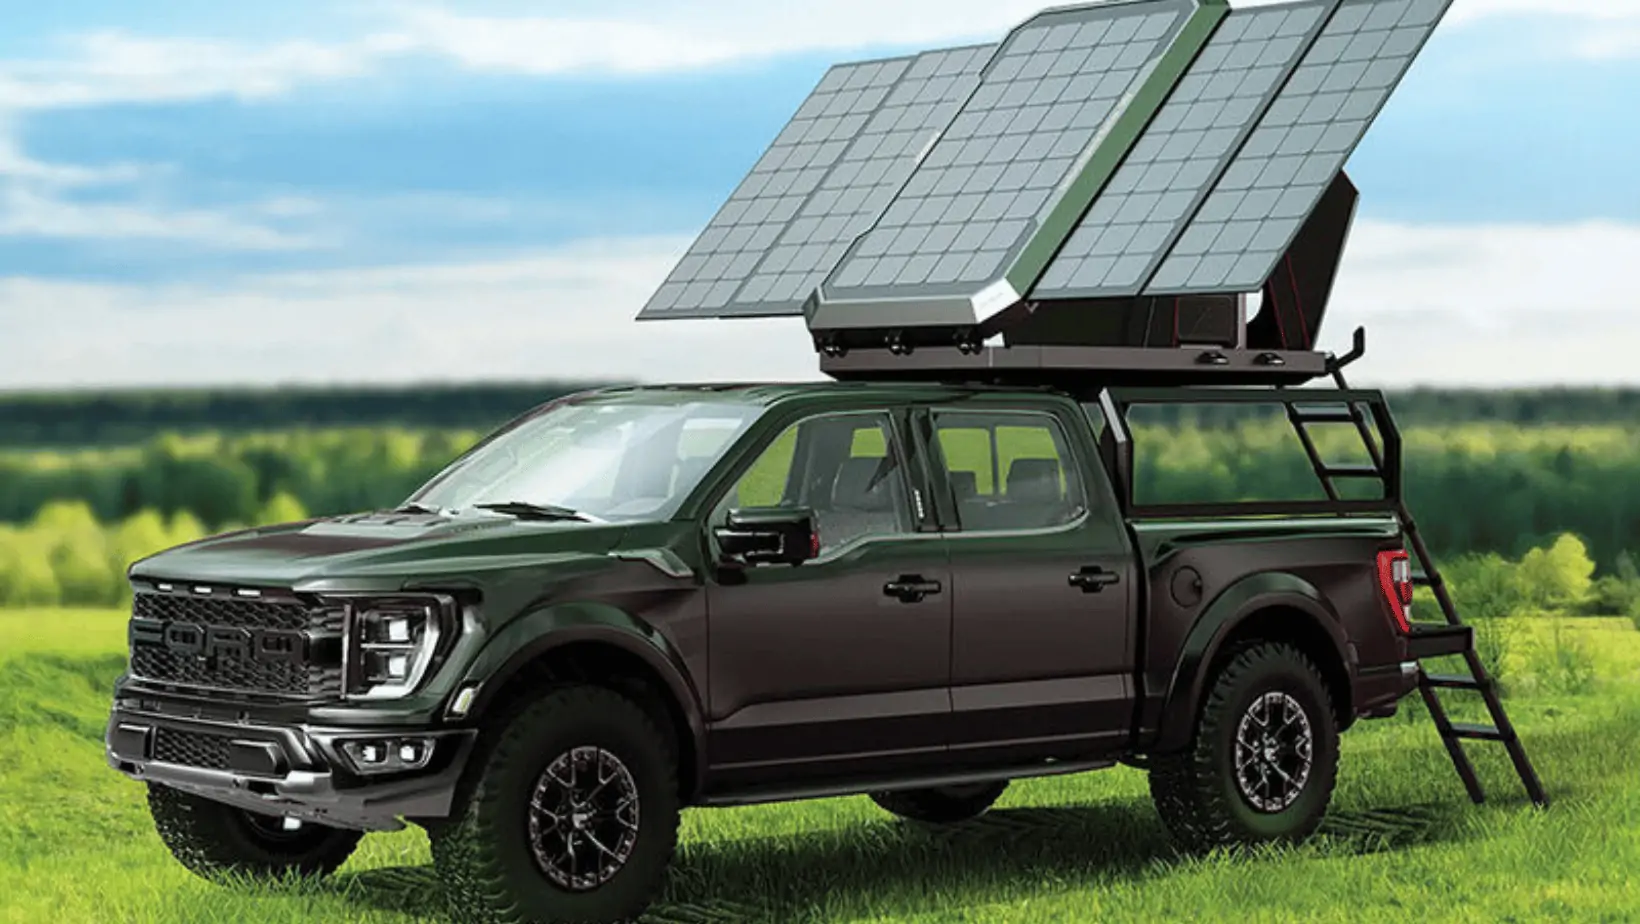 Jackery Unveils Solar-Powered Rooftop Tent Concept for Off-Grid Adventures